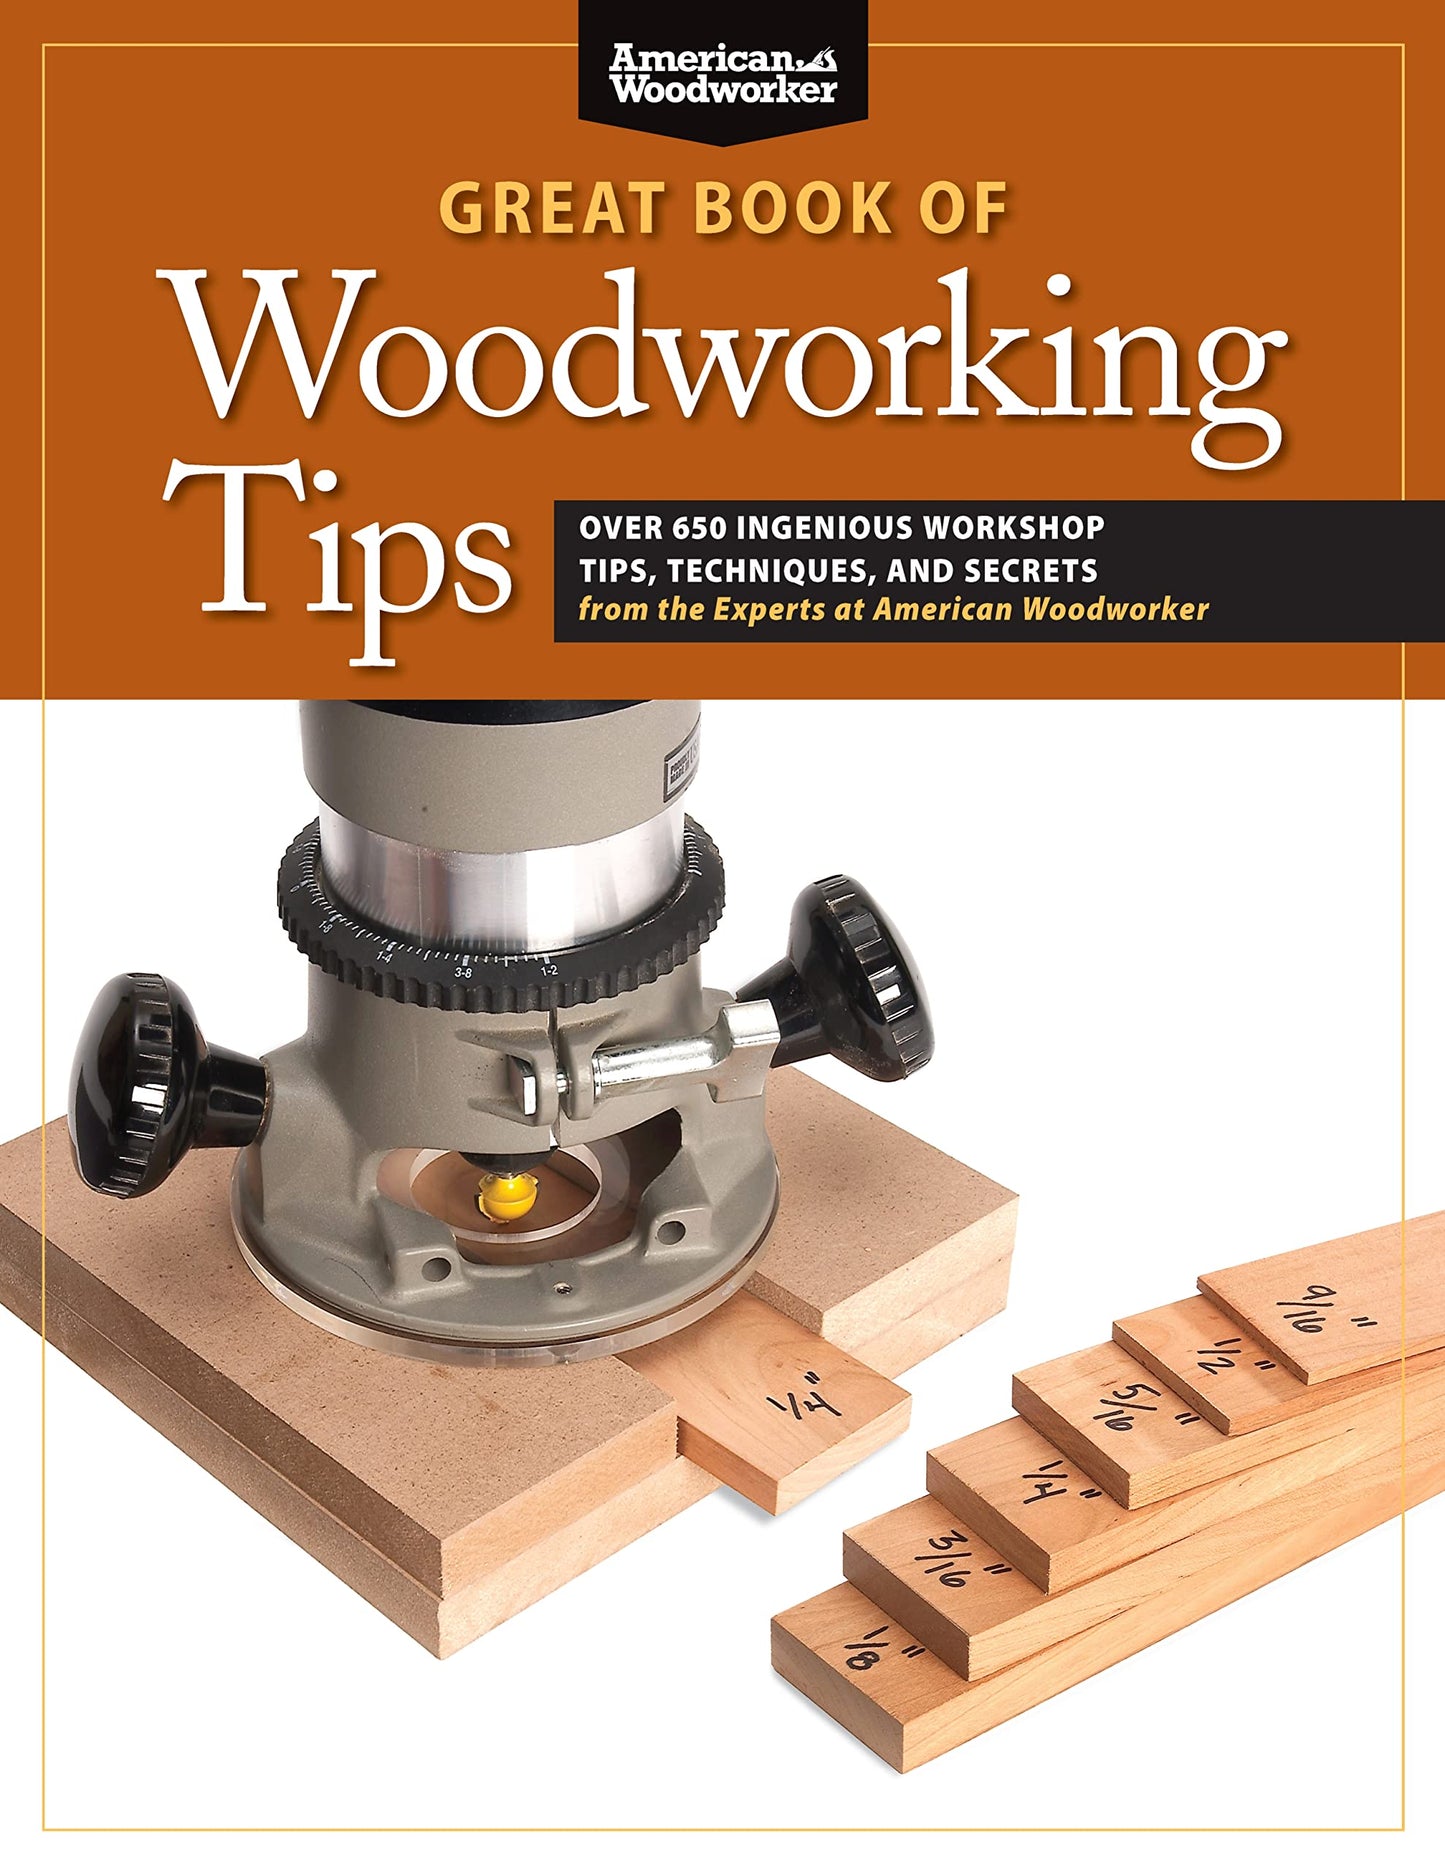 Great Book of Woodworking Tips: Over 650 Ingenious Workshop Tips, Techniques, and Secrets from the Experts at American Woodworker (Fox Chapel